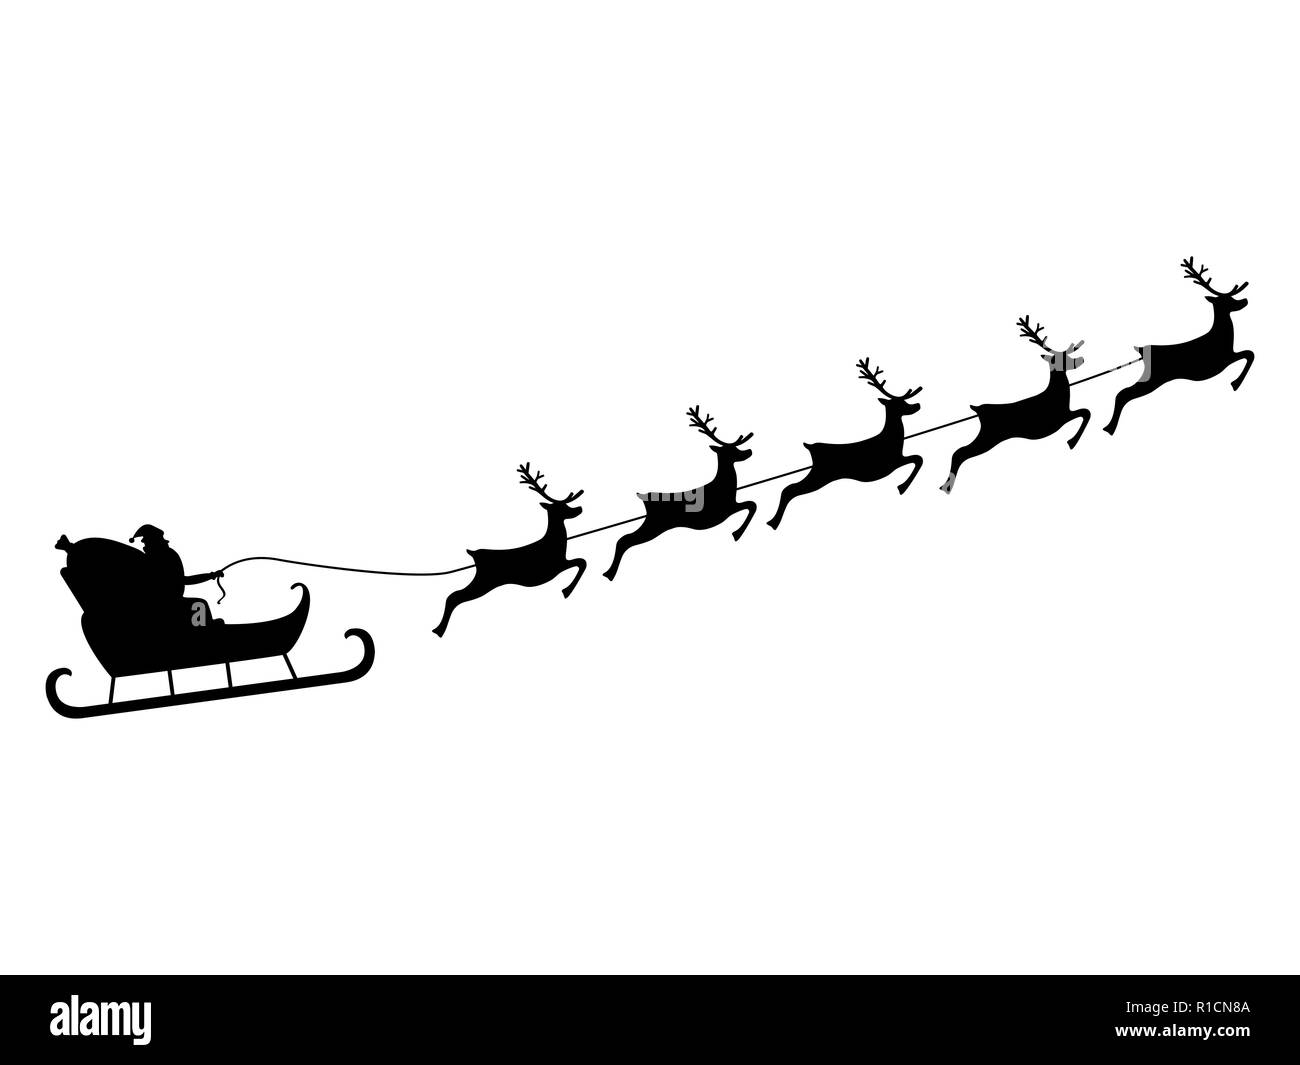 Santa Claus rides in a sleigh in harness on the reindeer  Stock Vector